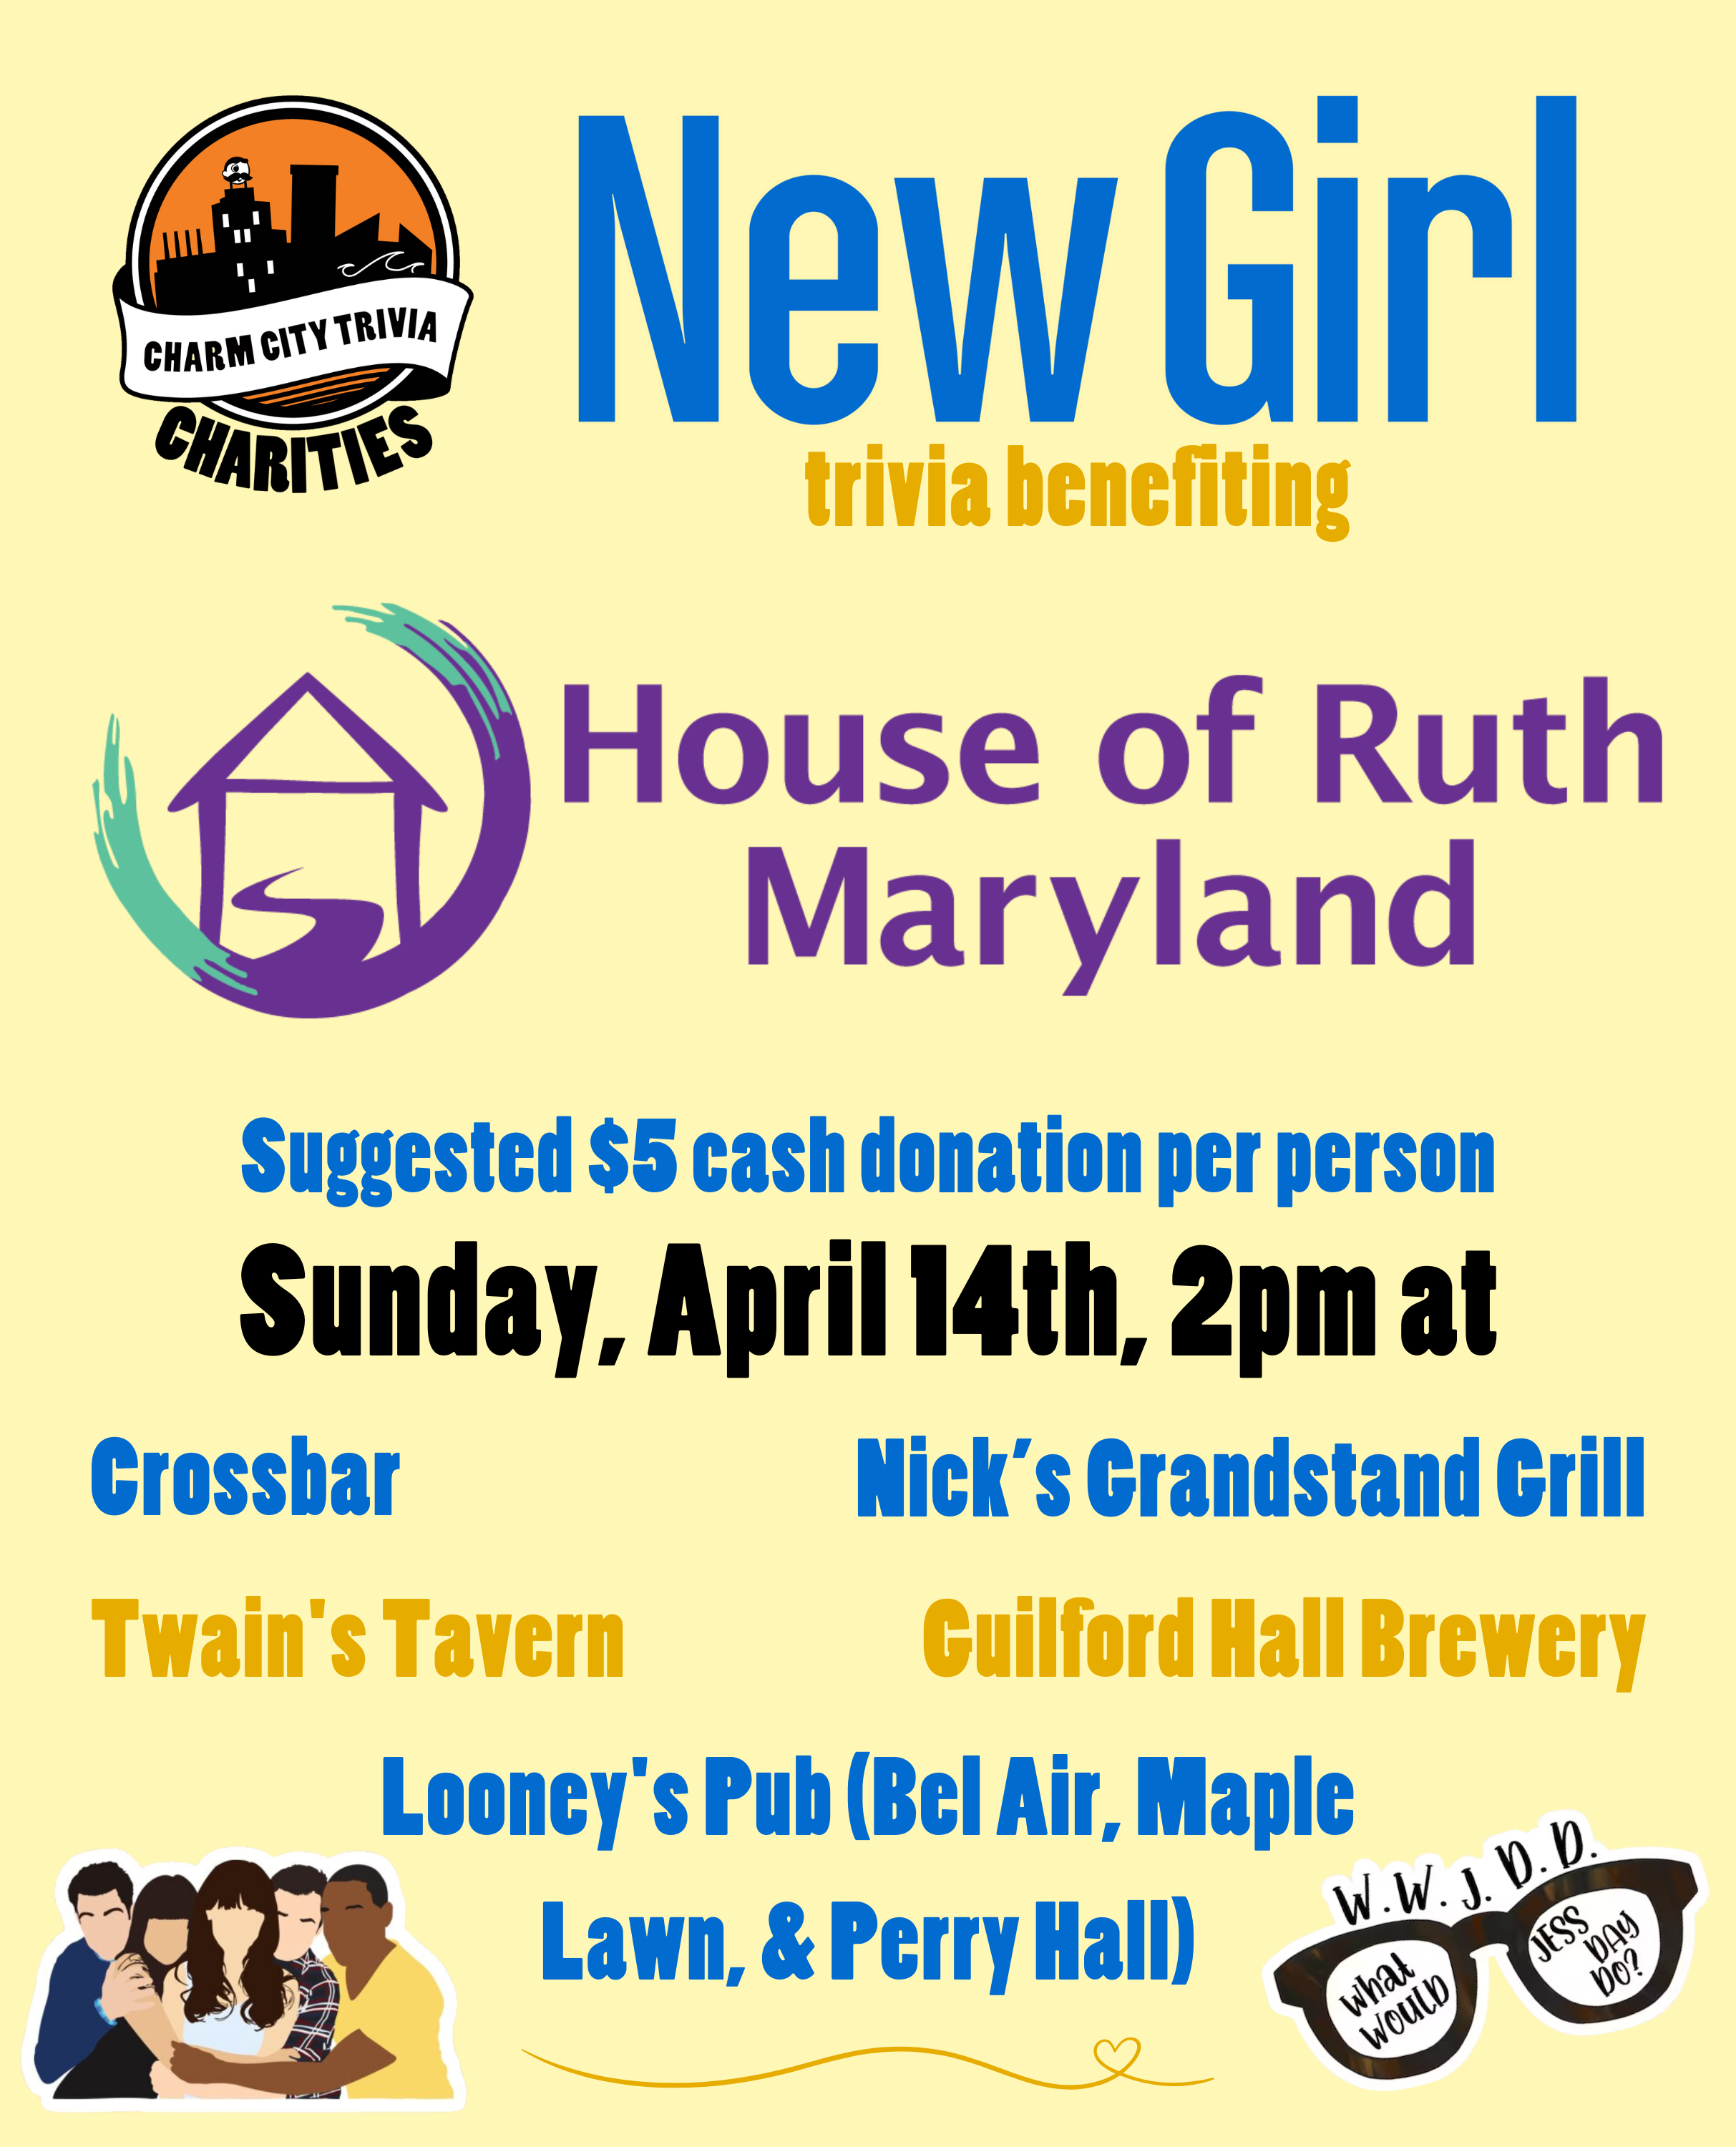 a light yellow background with the Charm City Trivia Charities logo, the House of Ruth Maryland logo, Jessica's glasses with text that says "W.W.J.D.D. What would Jess Day do?", a drawing of the main characters, and dark yellow, dark blue, and black text. The text reads: New Girl trivia benefiting House of Ruth Maryland. Suggested $5 cash donation per person. Sunday, April 14th, 2pm at. Crossbar. Guilford Hall Brewery. Nick's Grandstand Grill. Twain's Tavern. Looney's Pub (Bel Air, Maple Lawn, & Perry Hall)